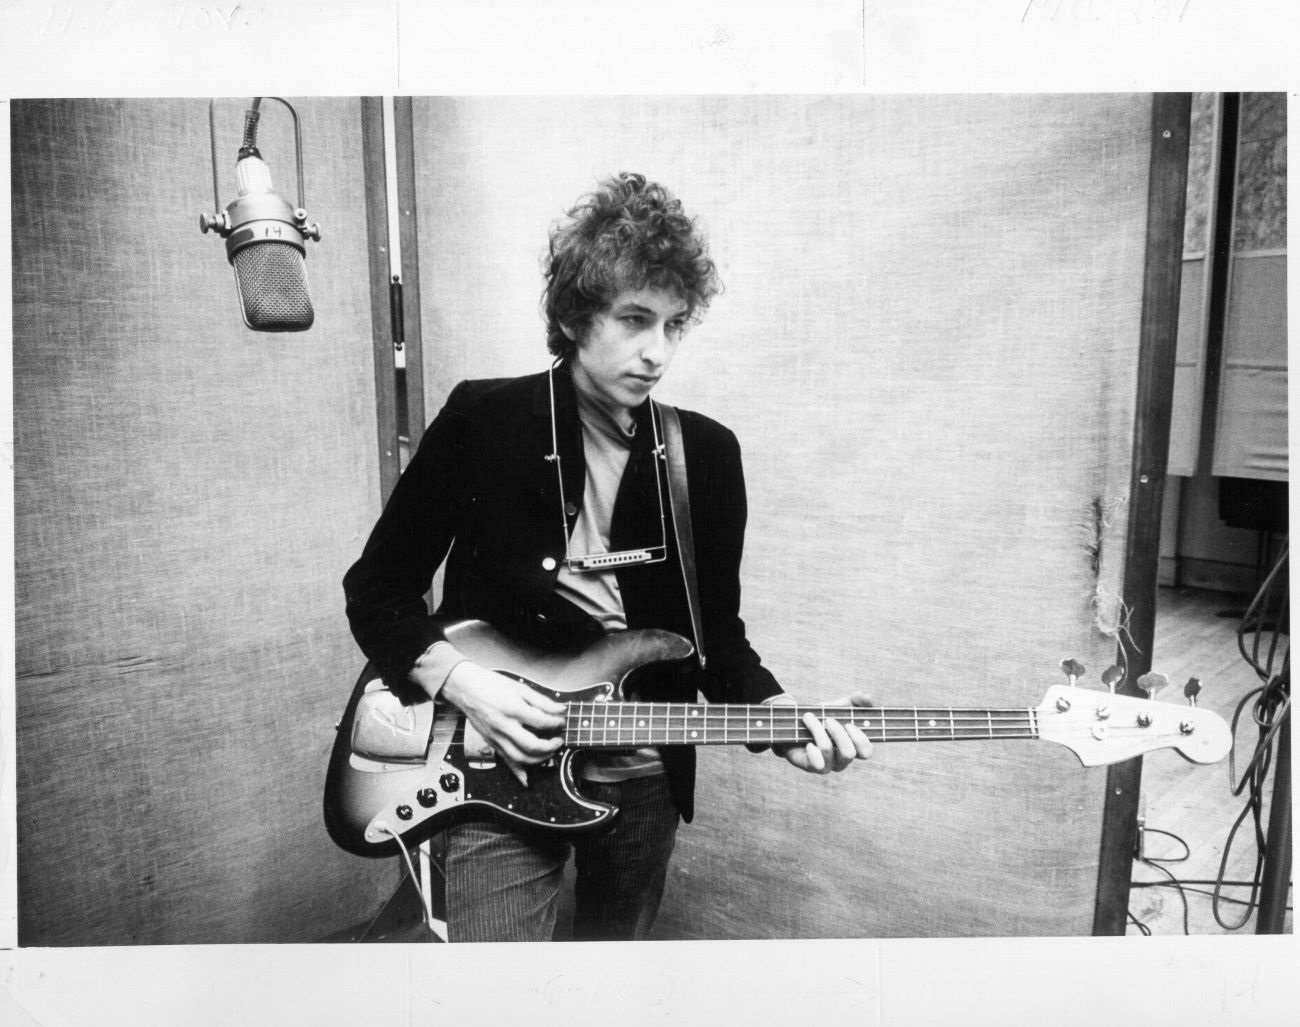 A back and white picture of Bob Dylan holding a guitar in a recording studio.